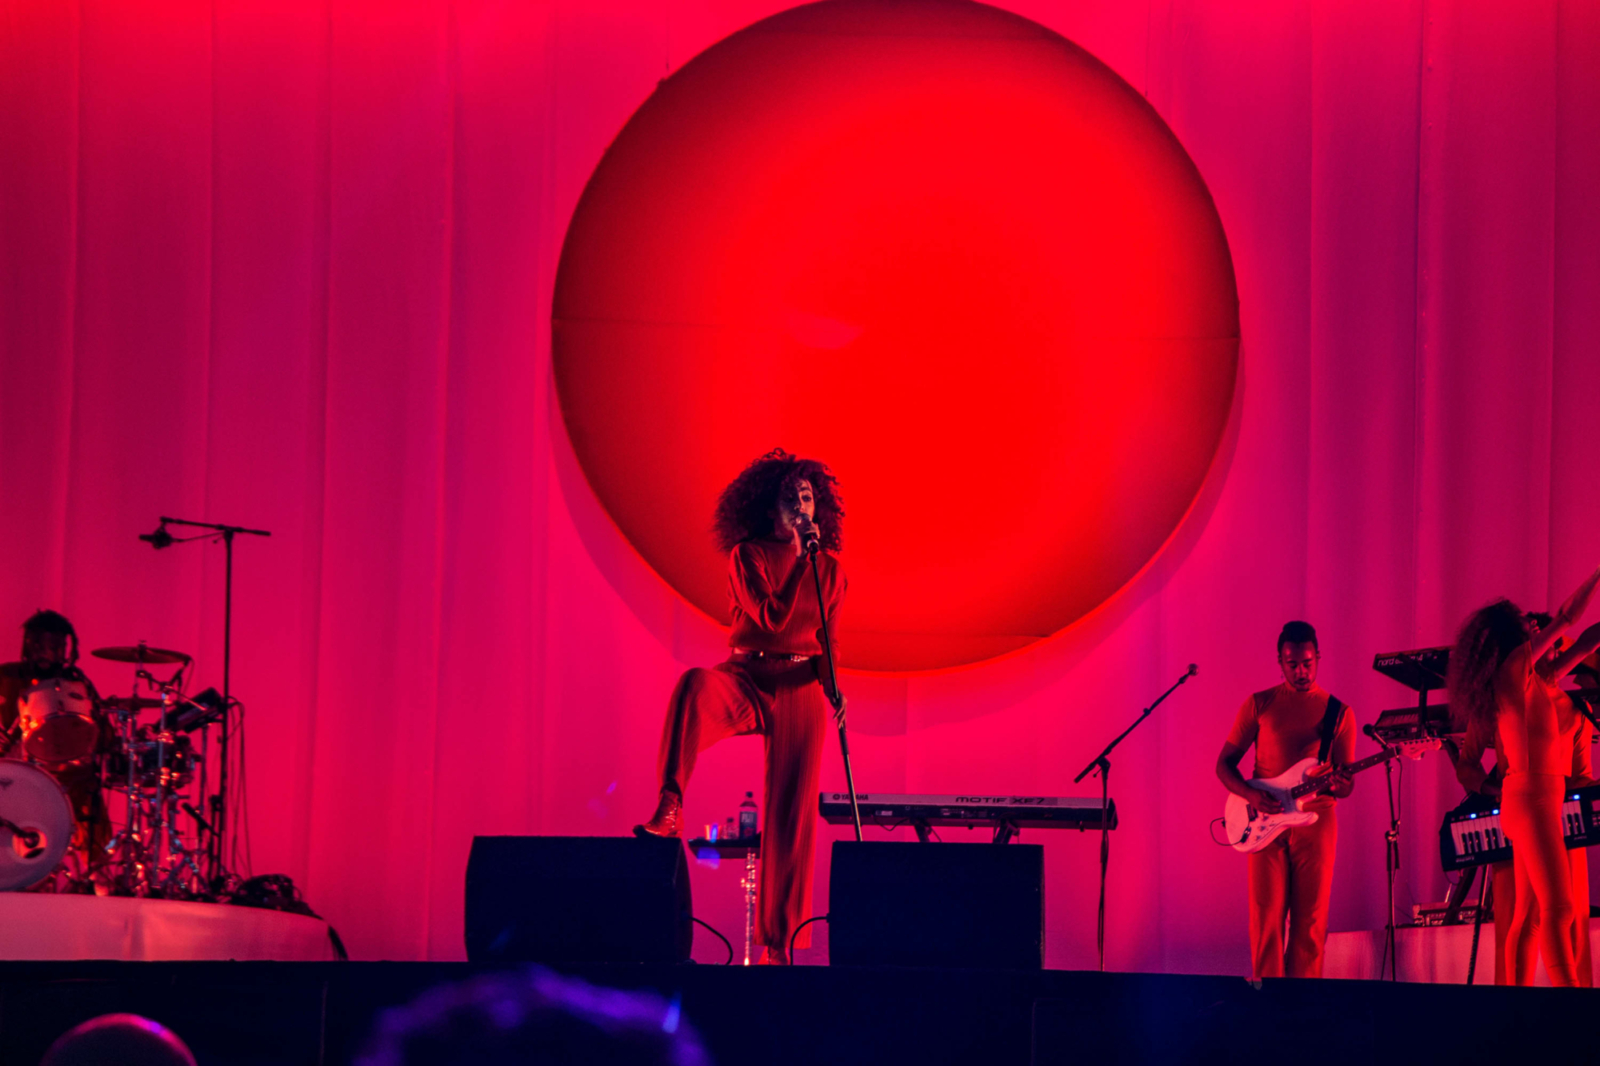 Solange has pulled out of Coachella